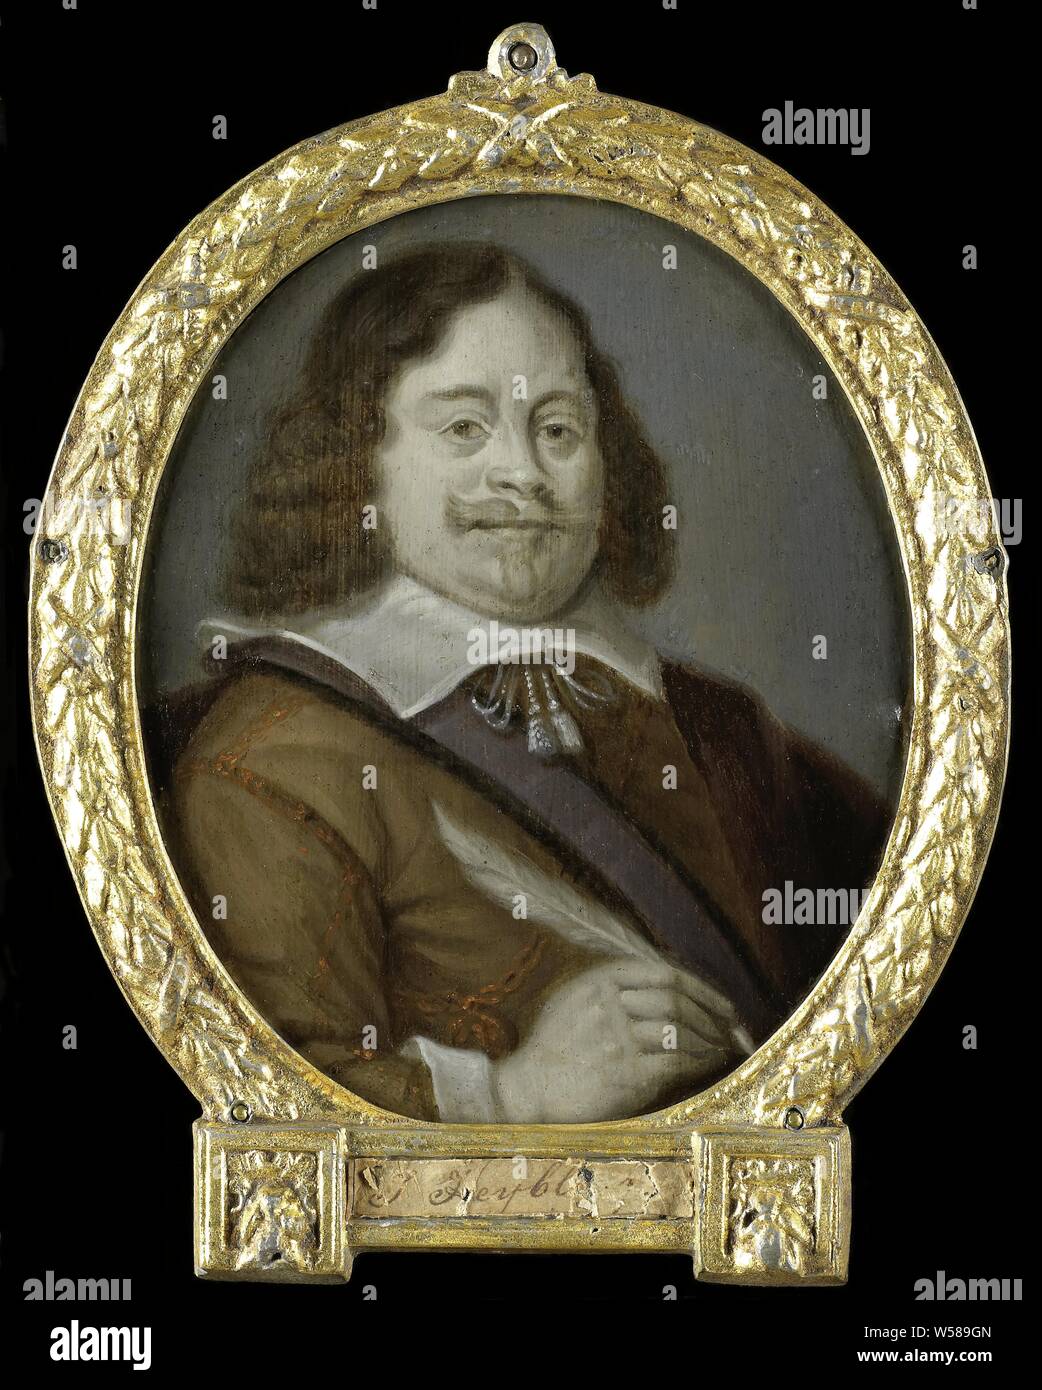 Portrait of Joannes Cools (born 1611), Jurist, Historian and Latin Poet in Hoorn, Portrait of Joannes Cools (born 1611). Lawyer, historian and Latin poet in Hoorn. Bust in oval, to the right, pen in the right hand. Part of a collection of portraits of Dutch poets, portrait of a writer, writer, poet, author, Joannes Cools, Arnoud van Halen, 1700 - 1732, oil paint (paint), h 11 cm × w 9.5 cm h 41.2 cm × w 47.4 cm × d 1.6 cm Stock Photo